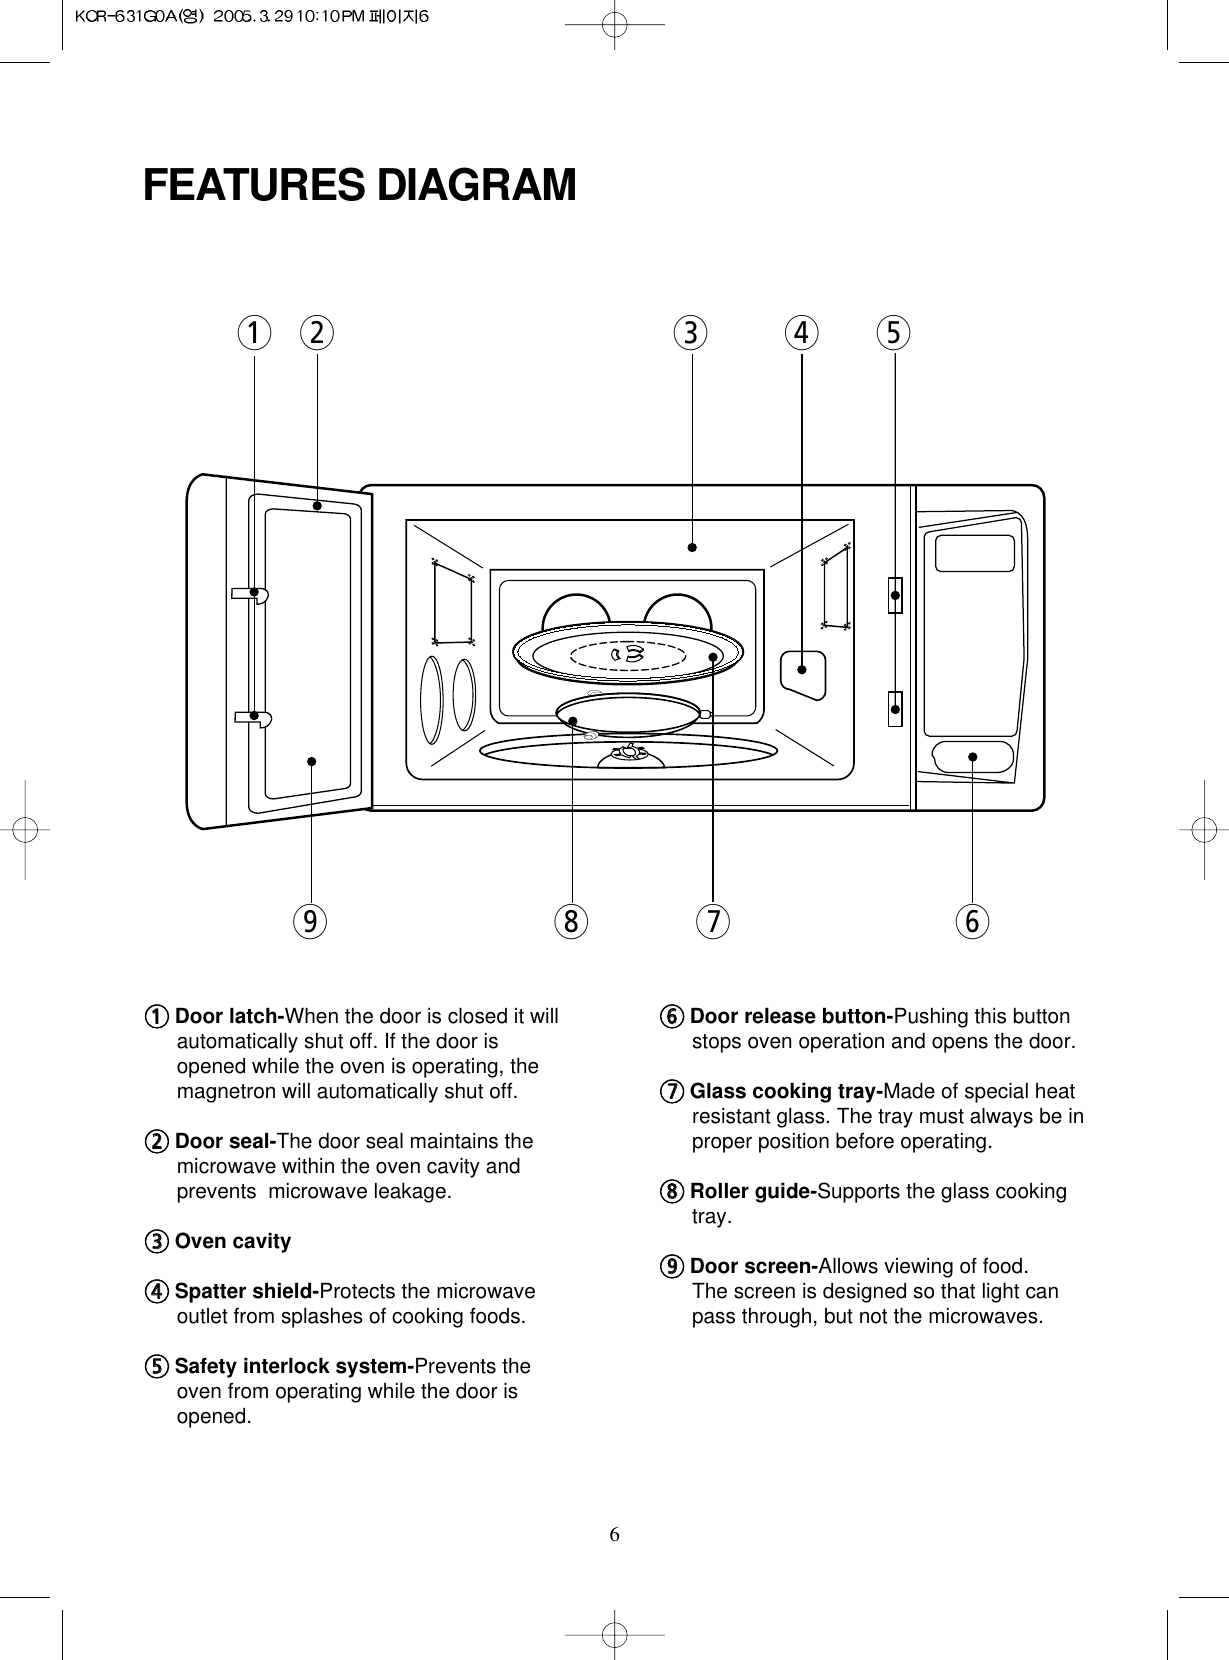 611Door latch-When the door is closed it willautomatically shut off. If the door isopened while the oven is operating, themagnetron will automatically shut off.22Door seal-The door seal maintains themicrowave within the oven cavity andprevents  microwave leakage.33Oven cavity44Spatter shield-Protects the microwaveoutlet from splashes of cooking foods.55Safety interlock system-Prevents theoven from operating while the door isopened.66Door release button-Pushing this buttonstops oven operation and opens the door.77Glass cooking tray-Made of special heatresistant glass. The tray must always be inproper position before operating. 88Roller guide-Supports the glass cookingtray.99Door screen-Allows viewing of food.The screen is designed so that light canpass through, but not the microwaves. FEATURES DIAGRAM543219876